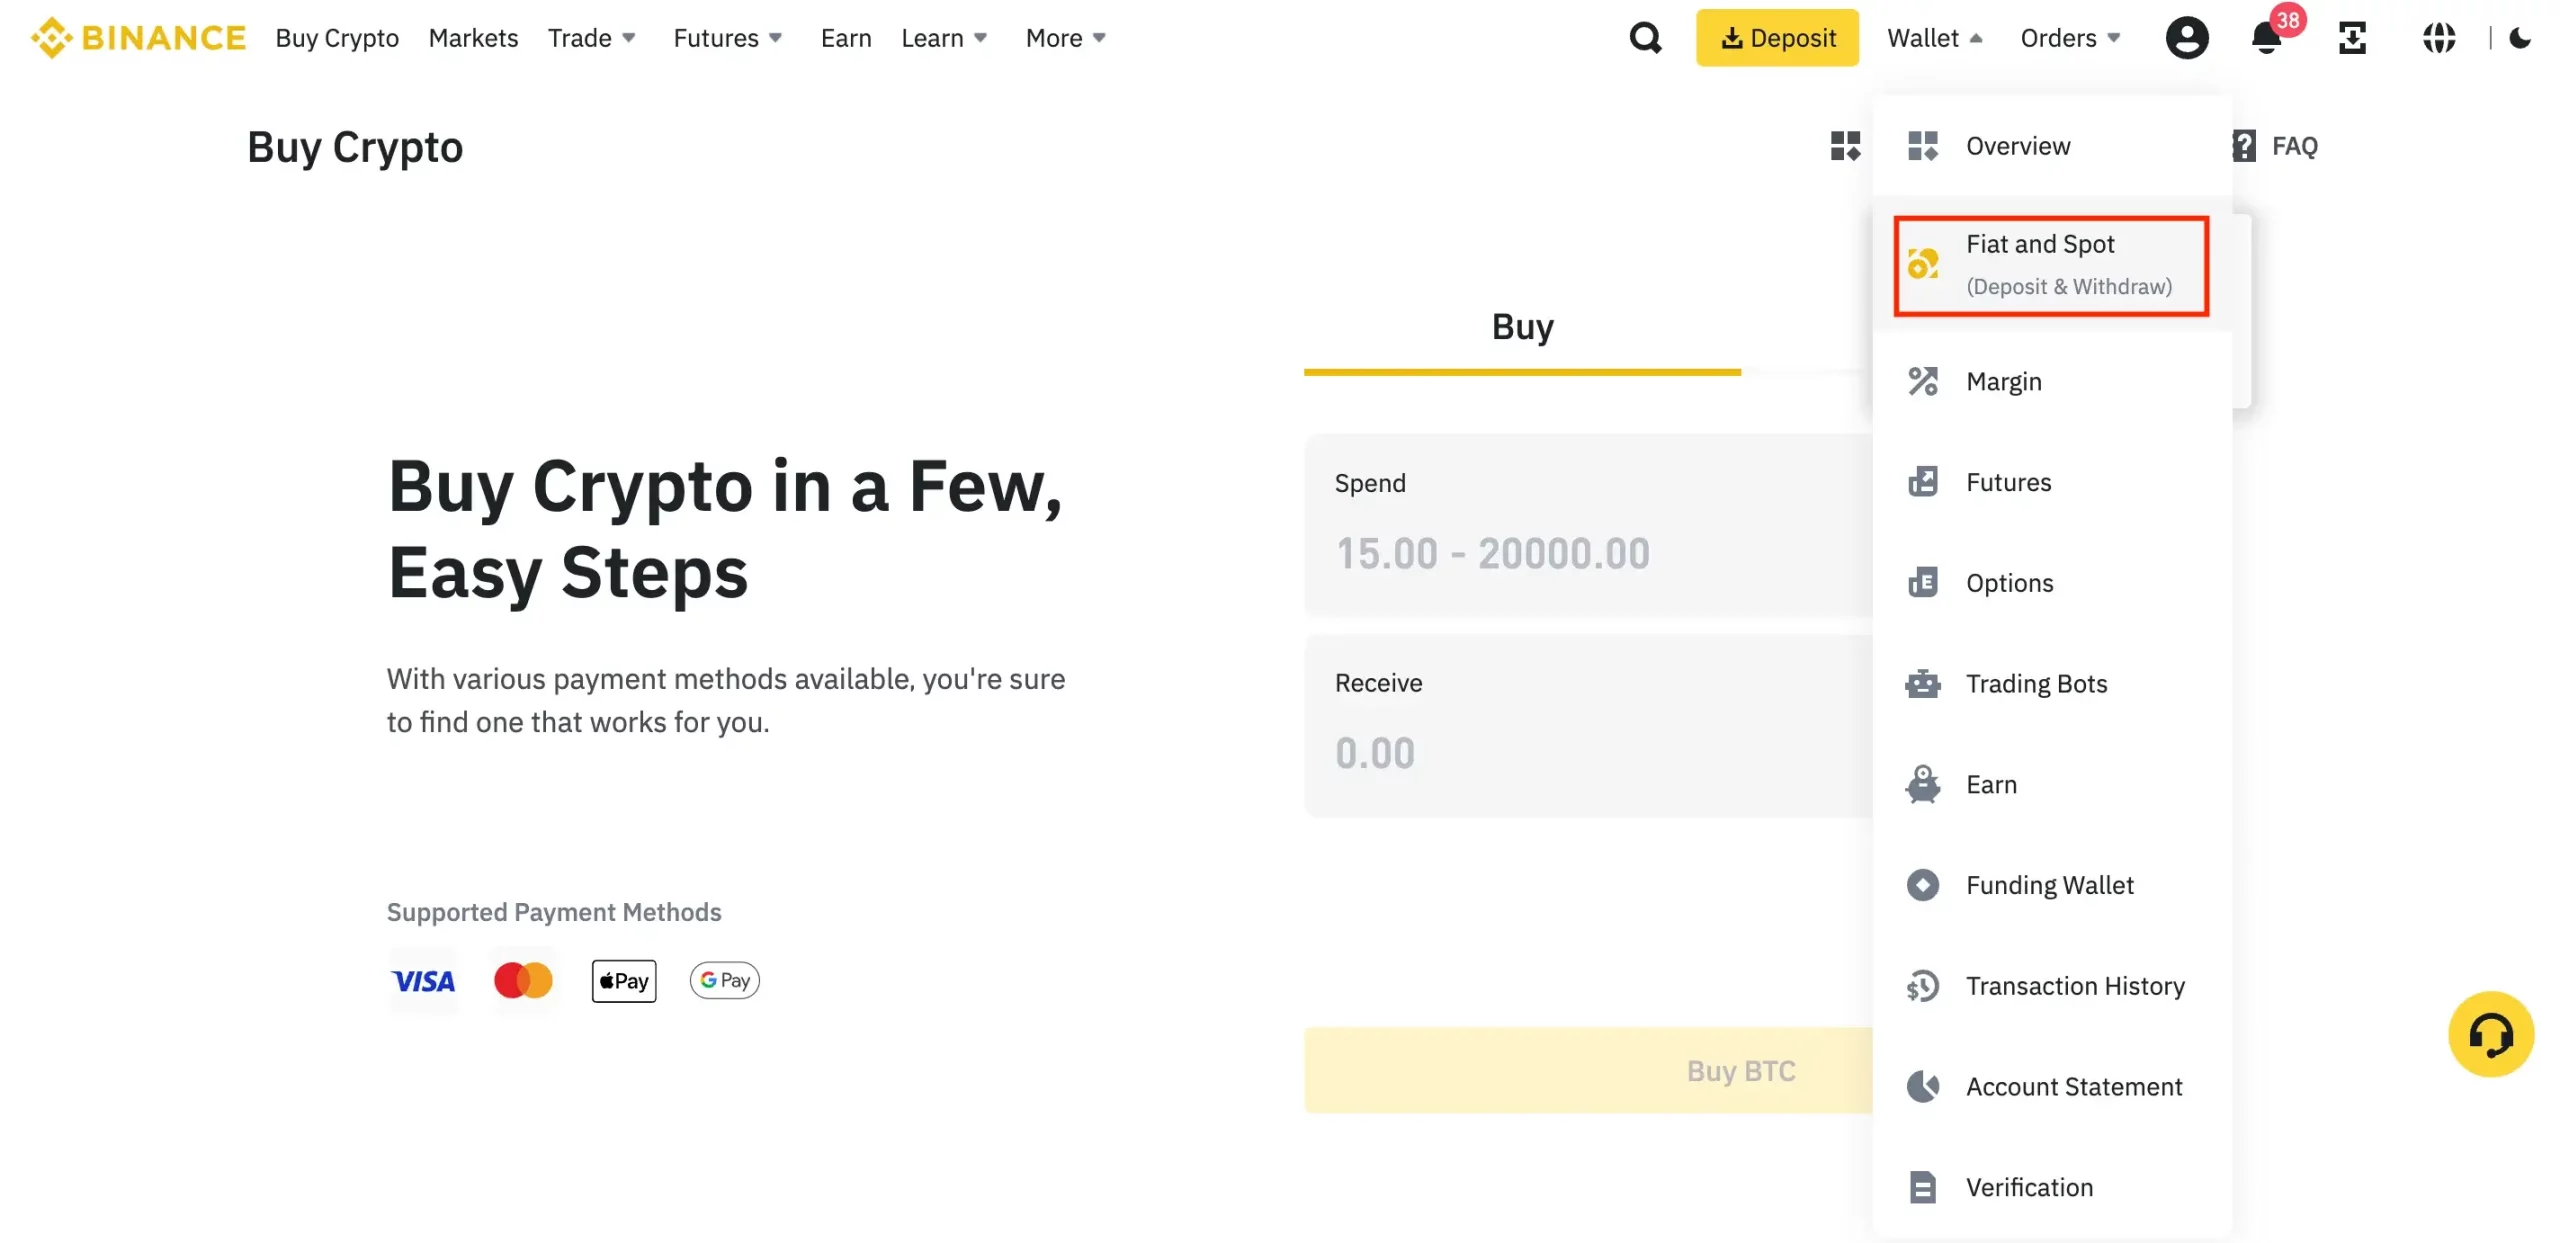 Step 1: Log into your Binance account, go to the "Wallet" tab, and click "Fiat and Spot Wallet."